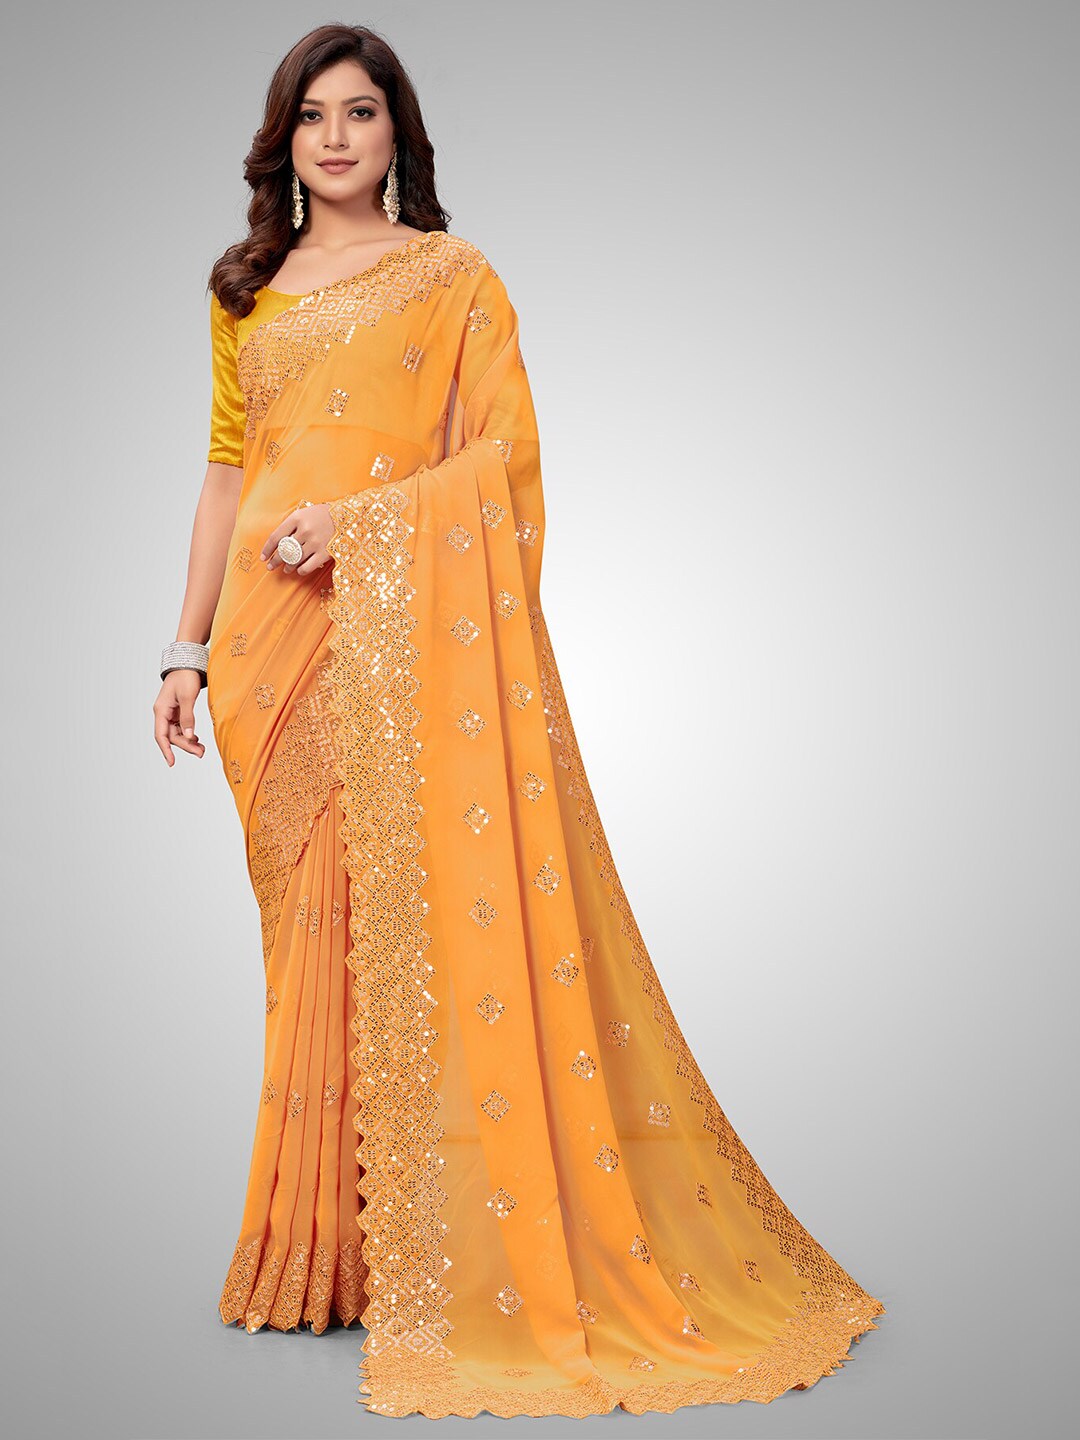 Granthva Fab Women Yellow & Gold-Toned Embellished Sequined Pure Georgette Saree Price in India